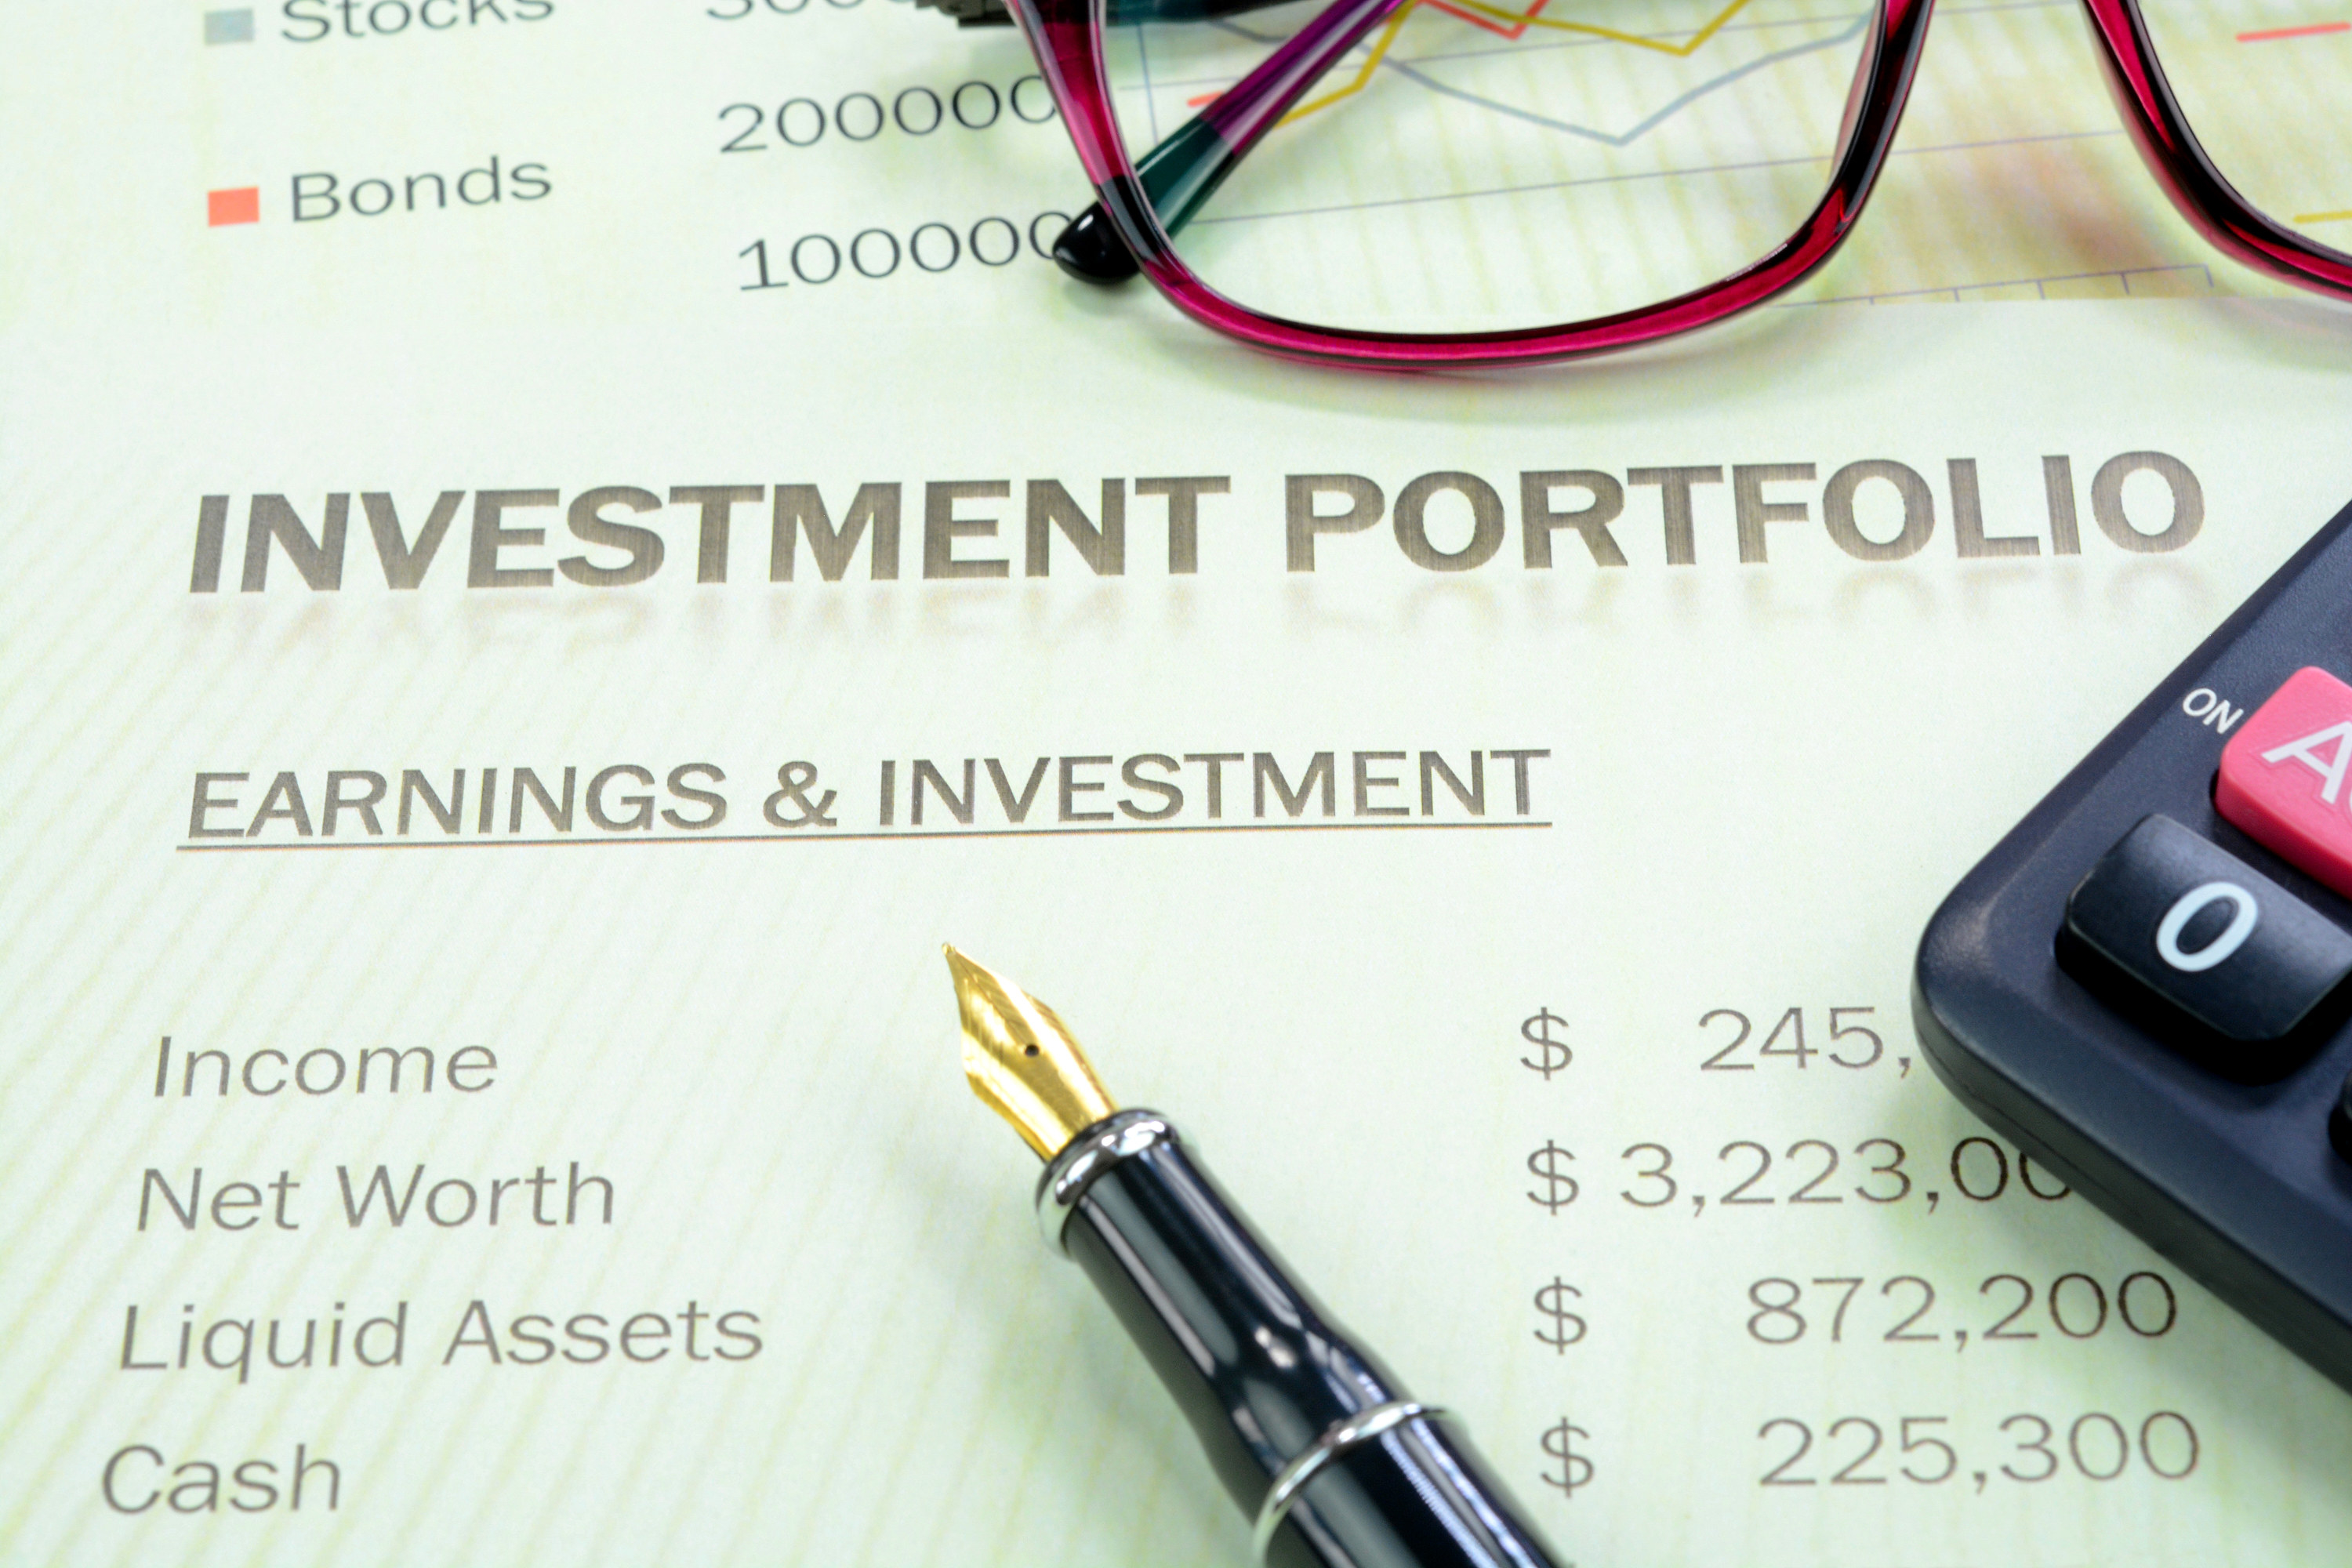 Paper that says &quot;investment portfolio&quot; and lists earnings and investments